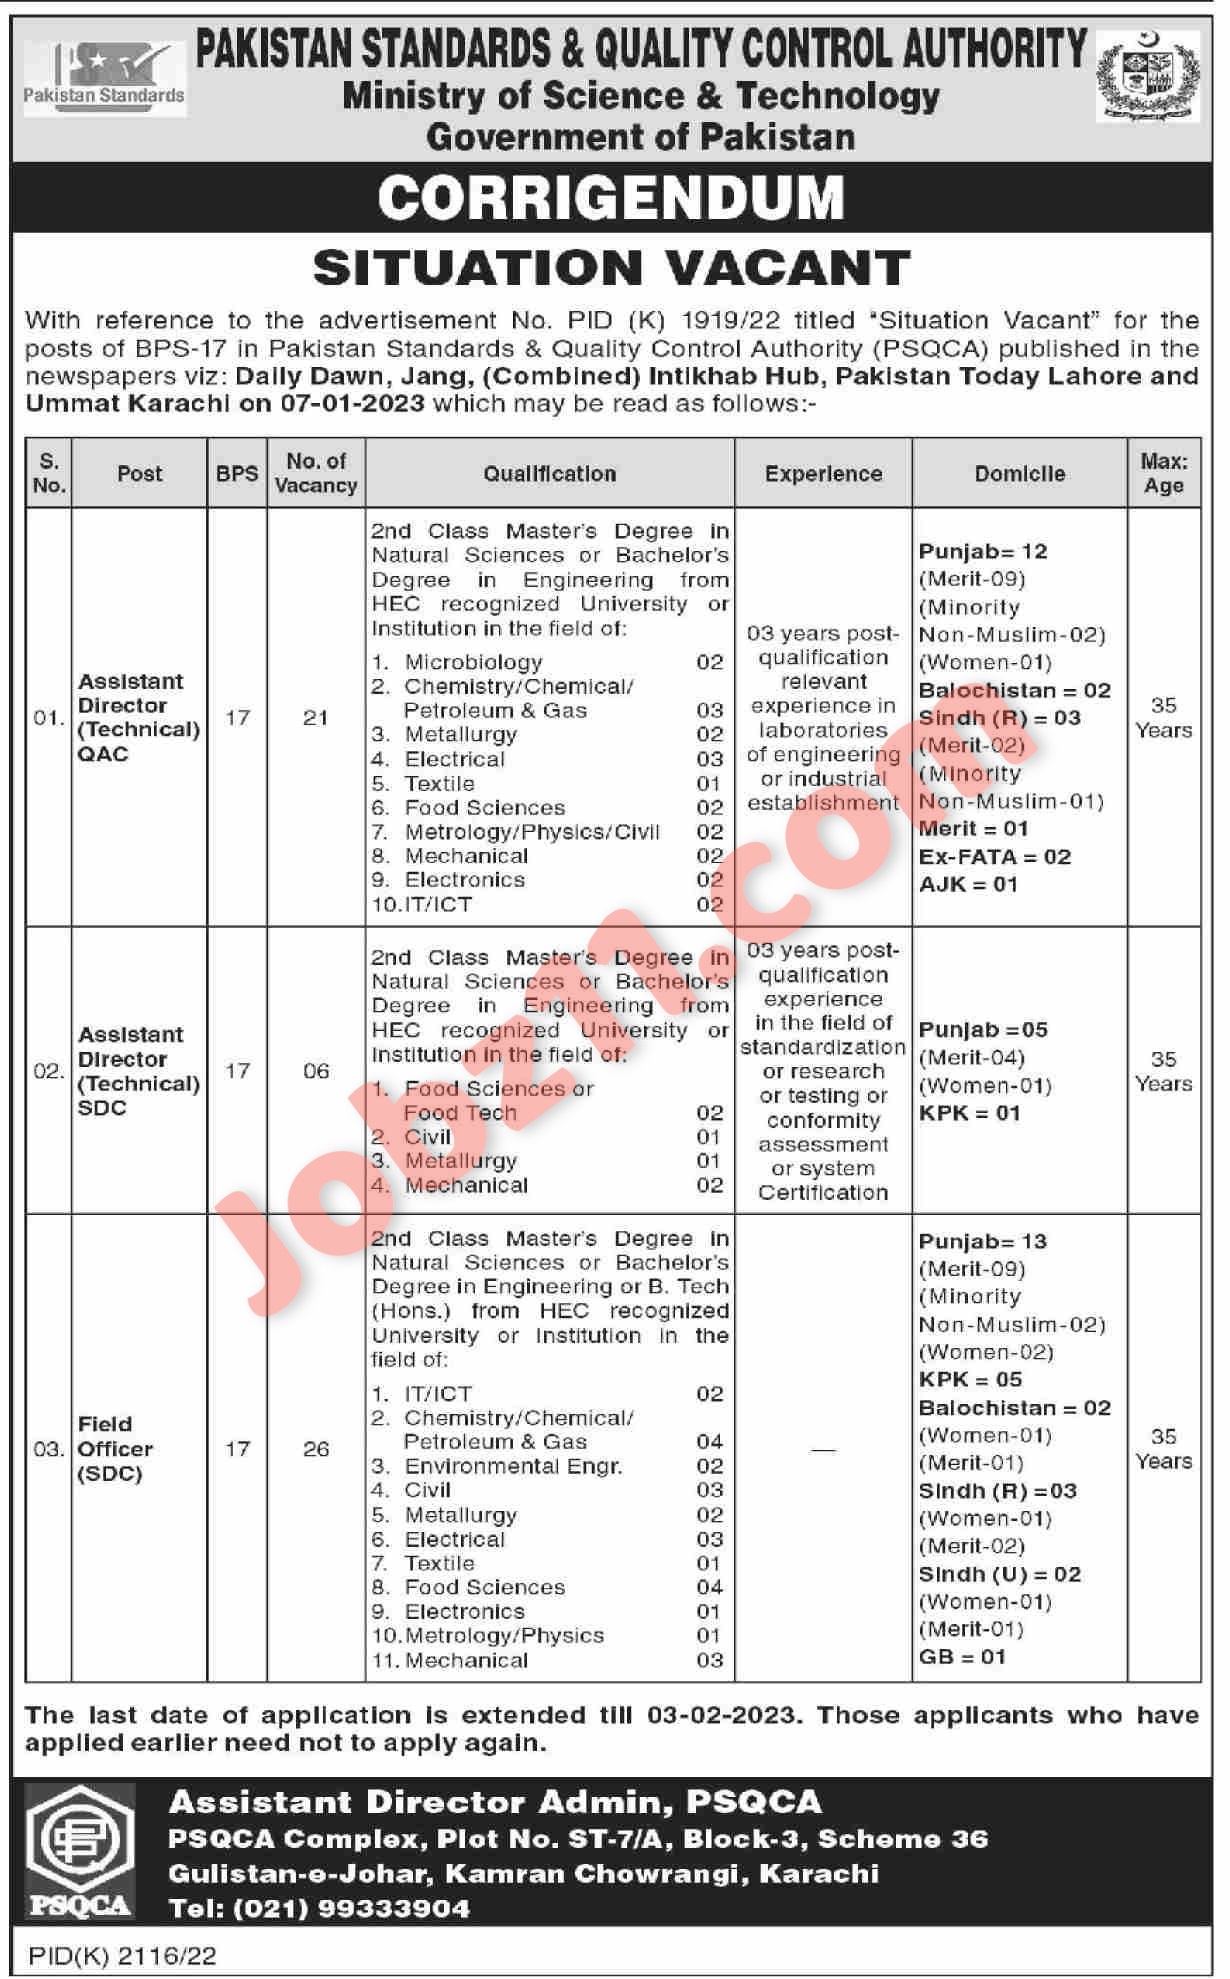 Pakistan Standard Control Authority Jobs 2023 for Assistant Directors, Filed Officers